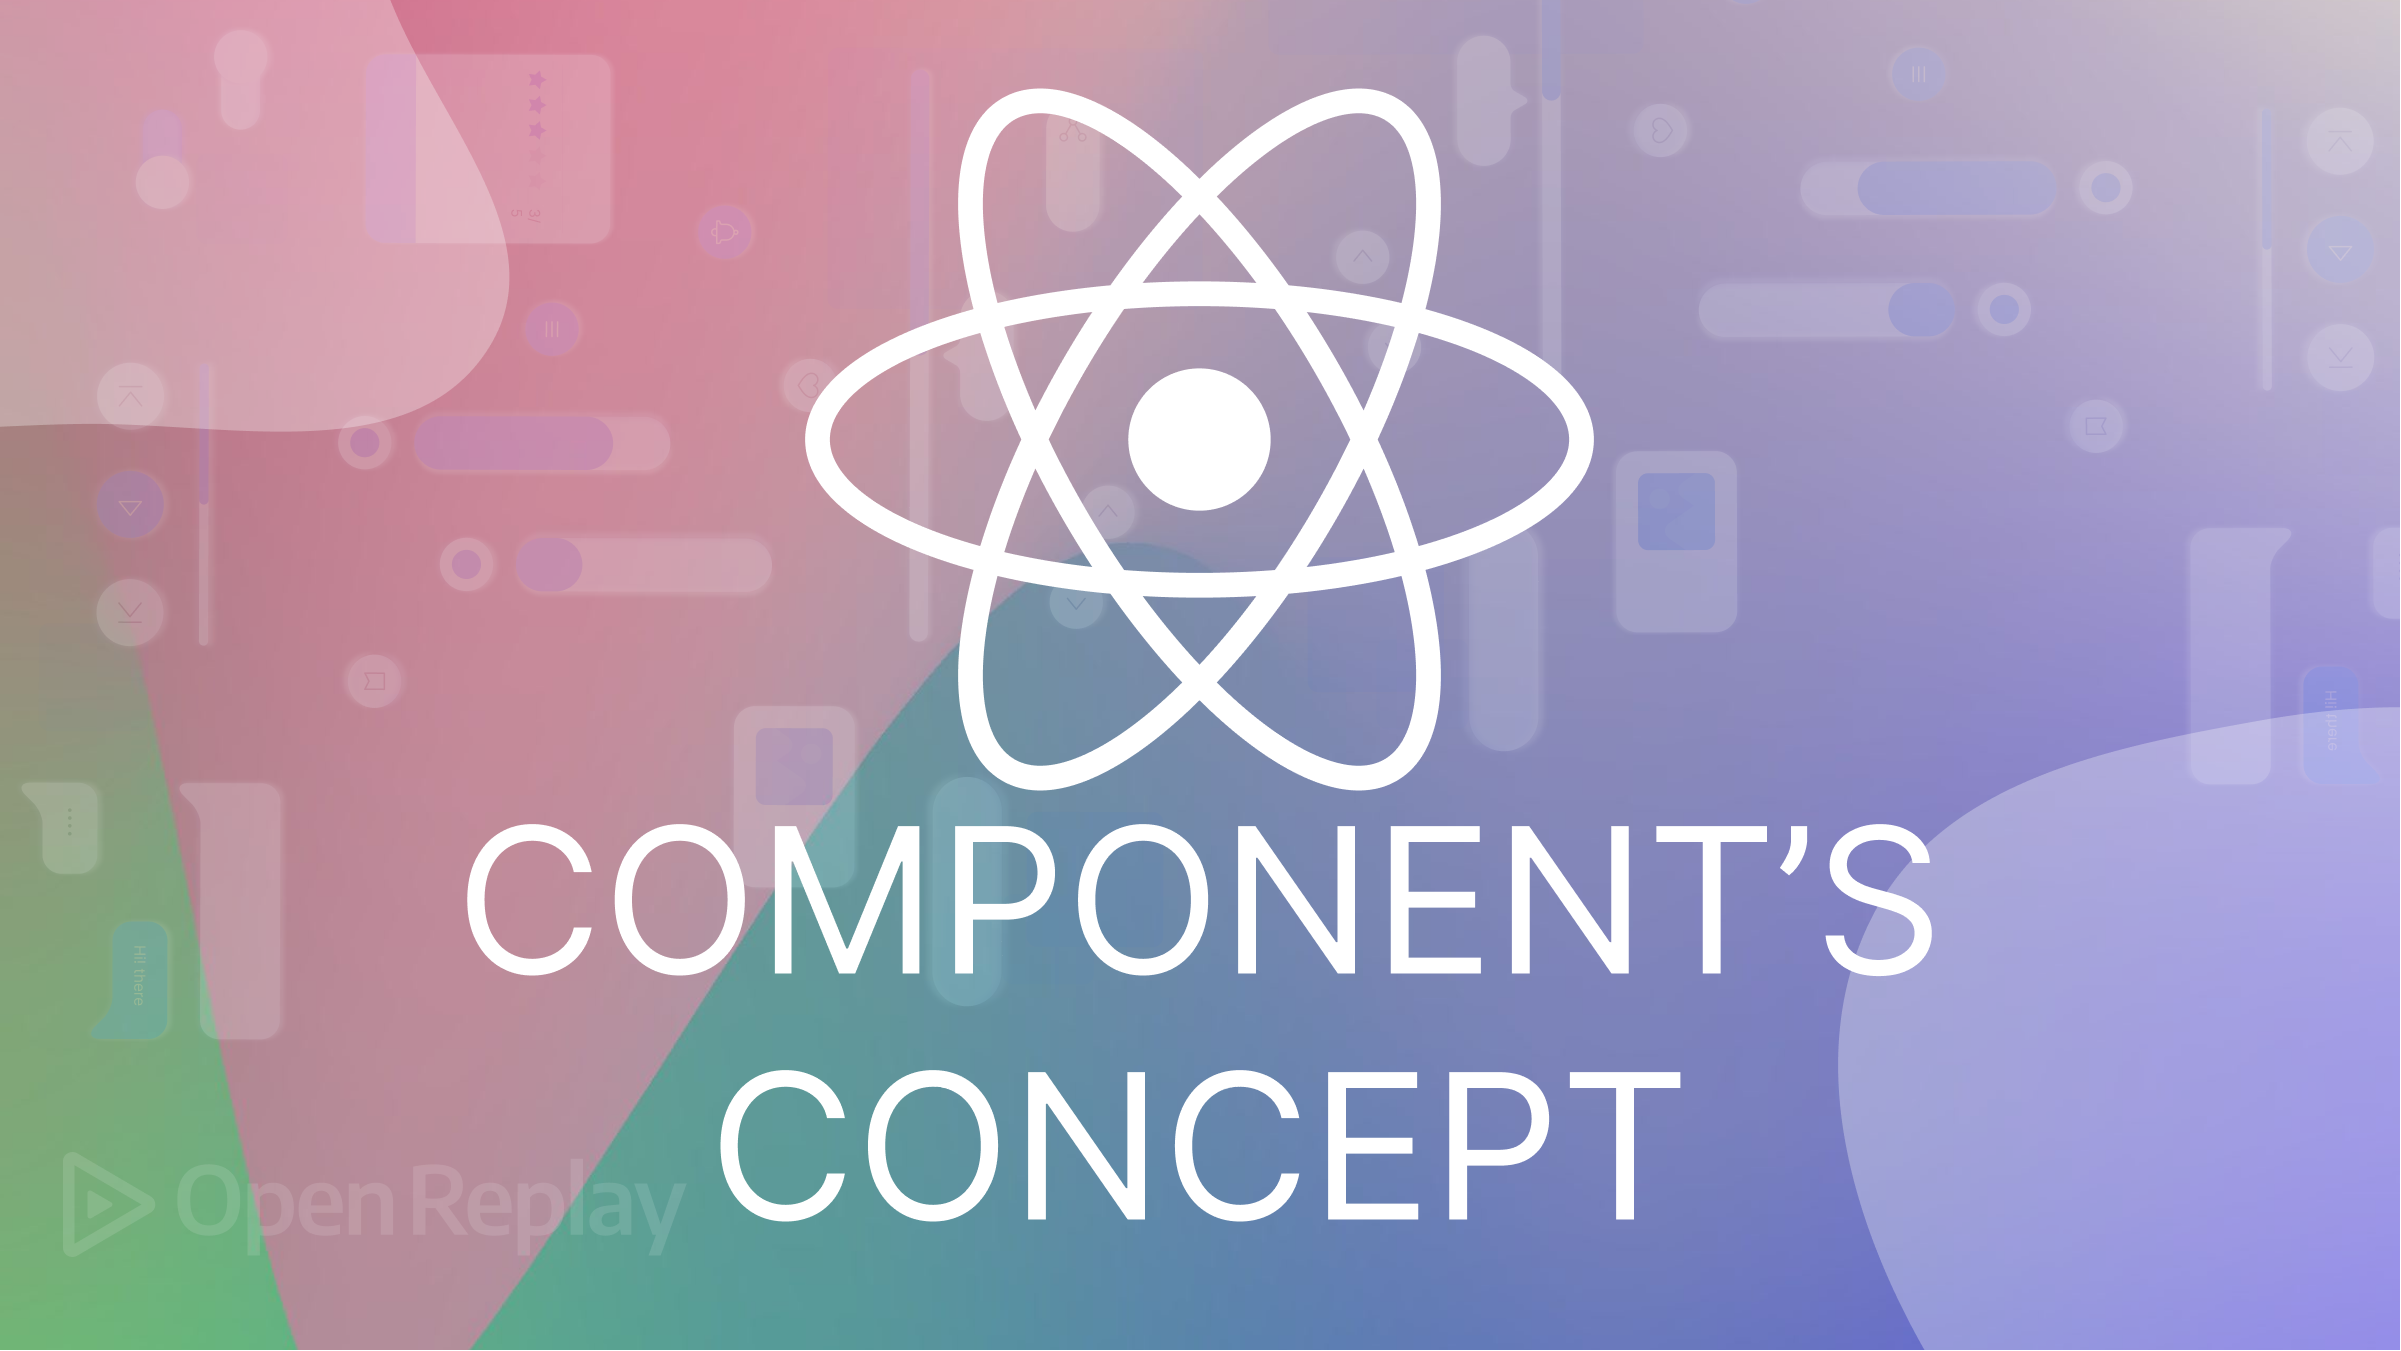 React's Layout Component's Concept